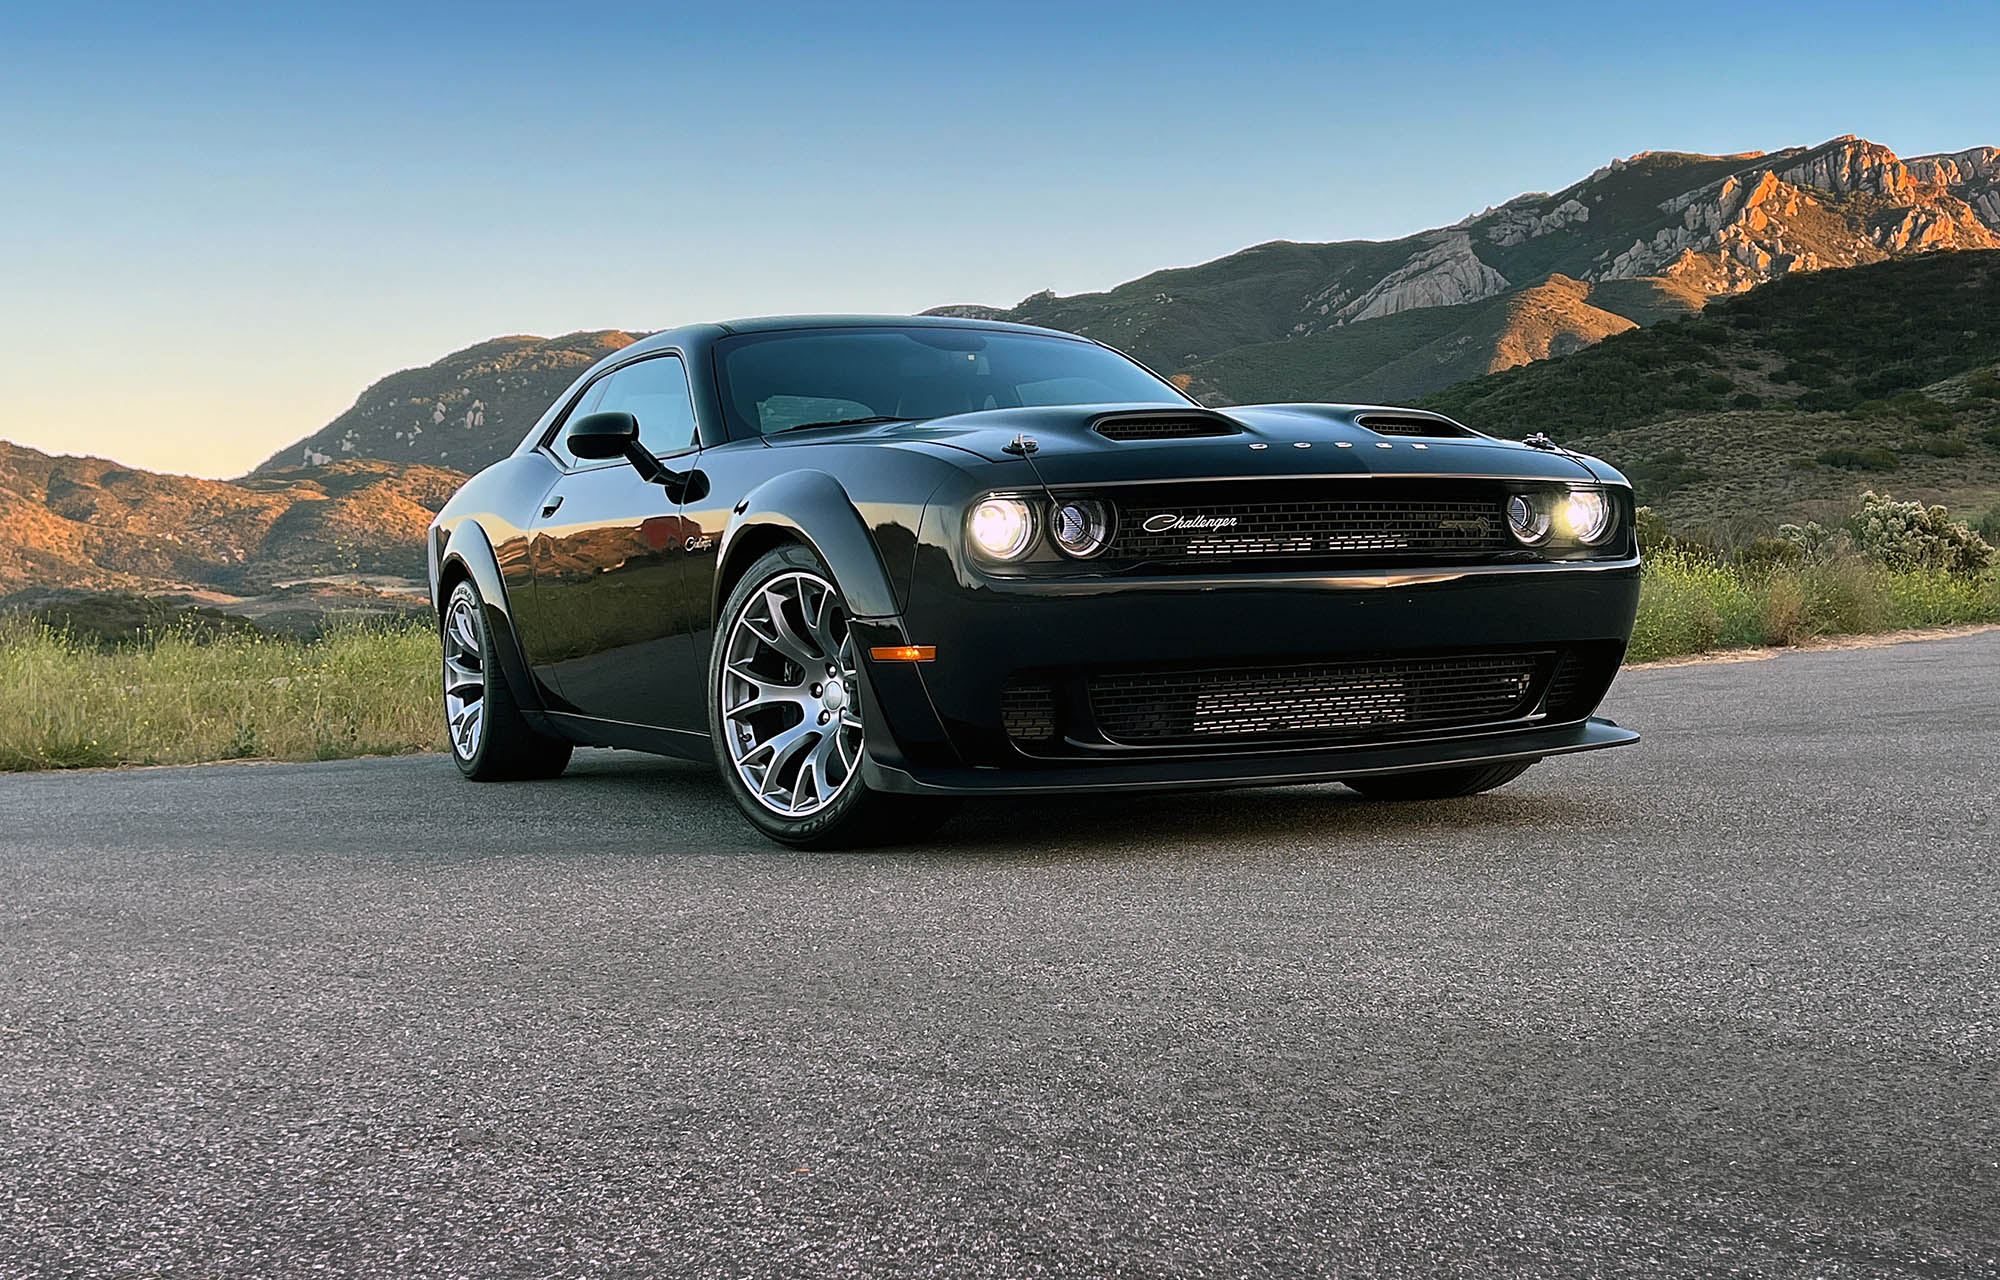 2023 Dodge Challenger Black Ghost front three-quarter view with mountains in the background.